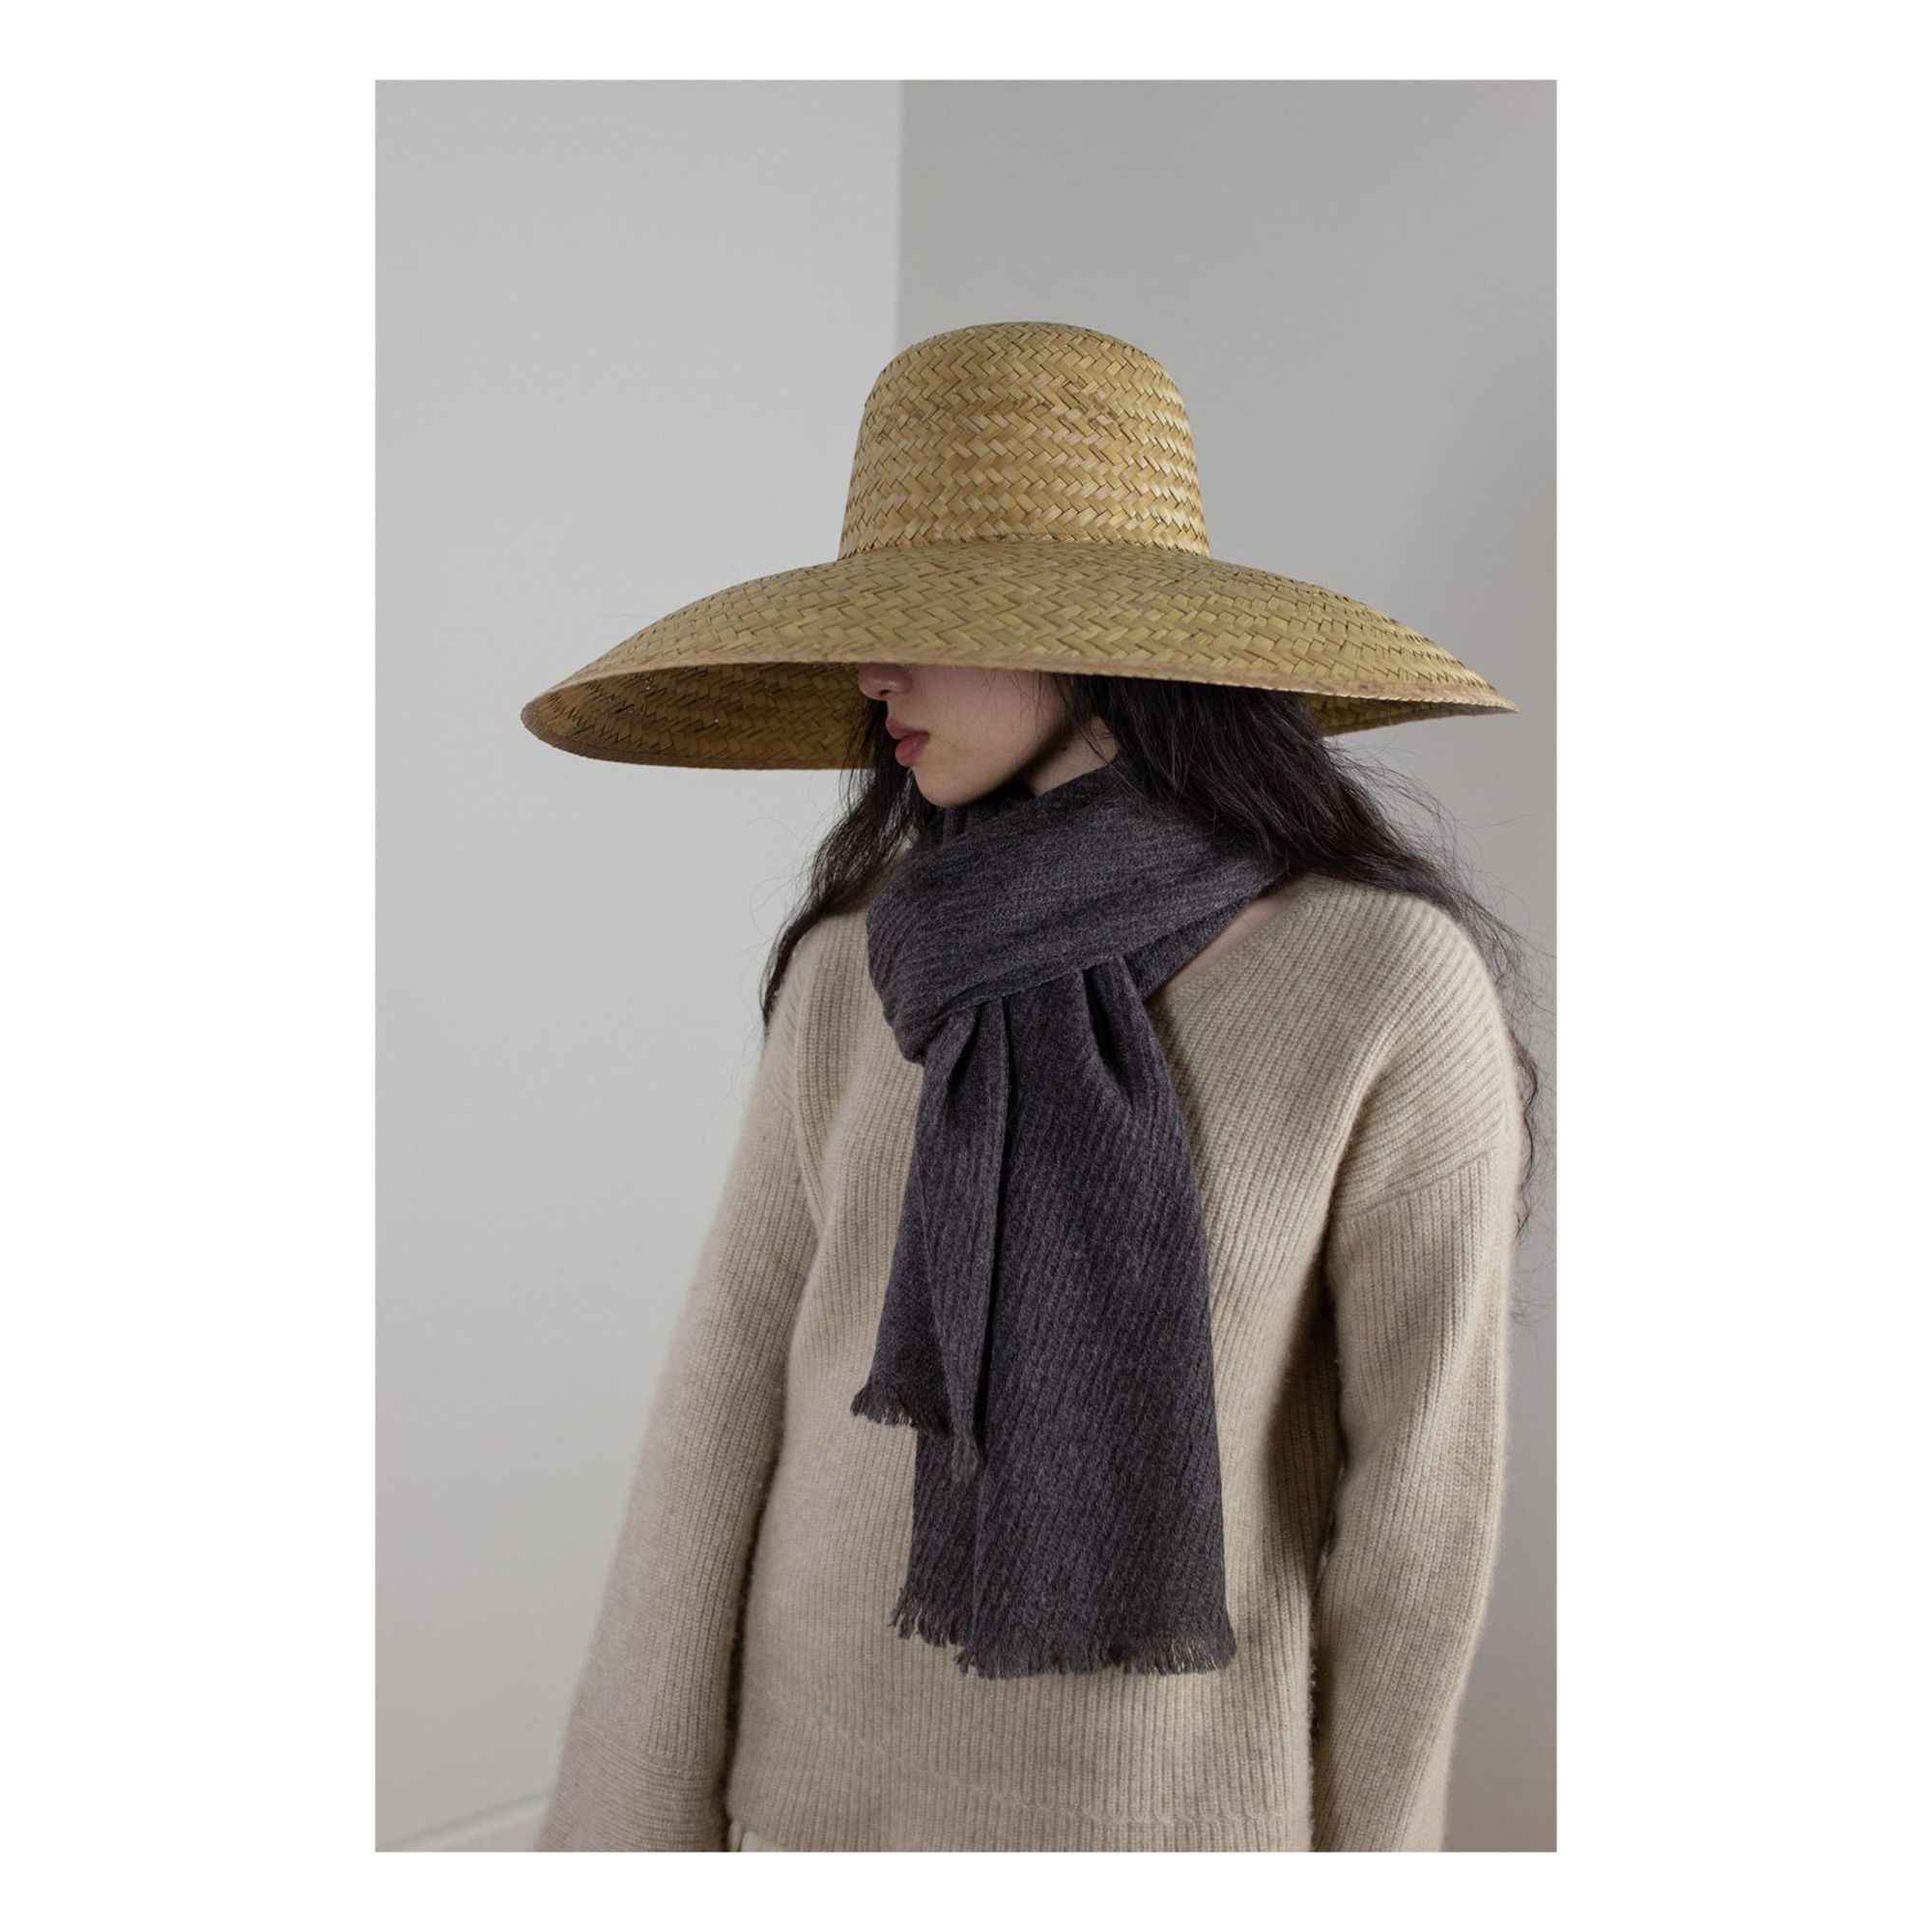 Classic Plain Cashmere Scarf Brown • Oats & Rice